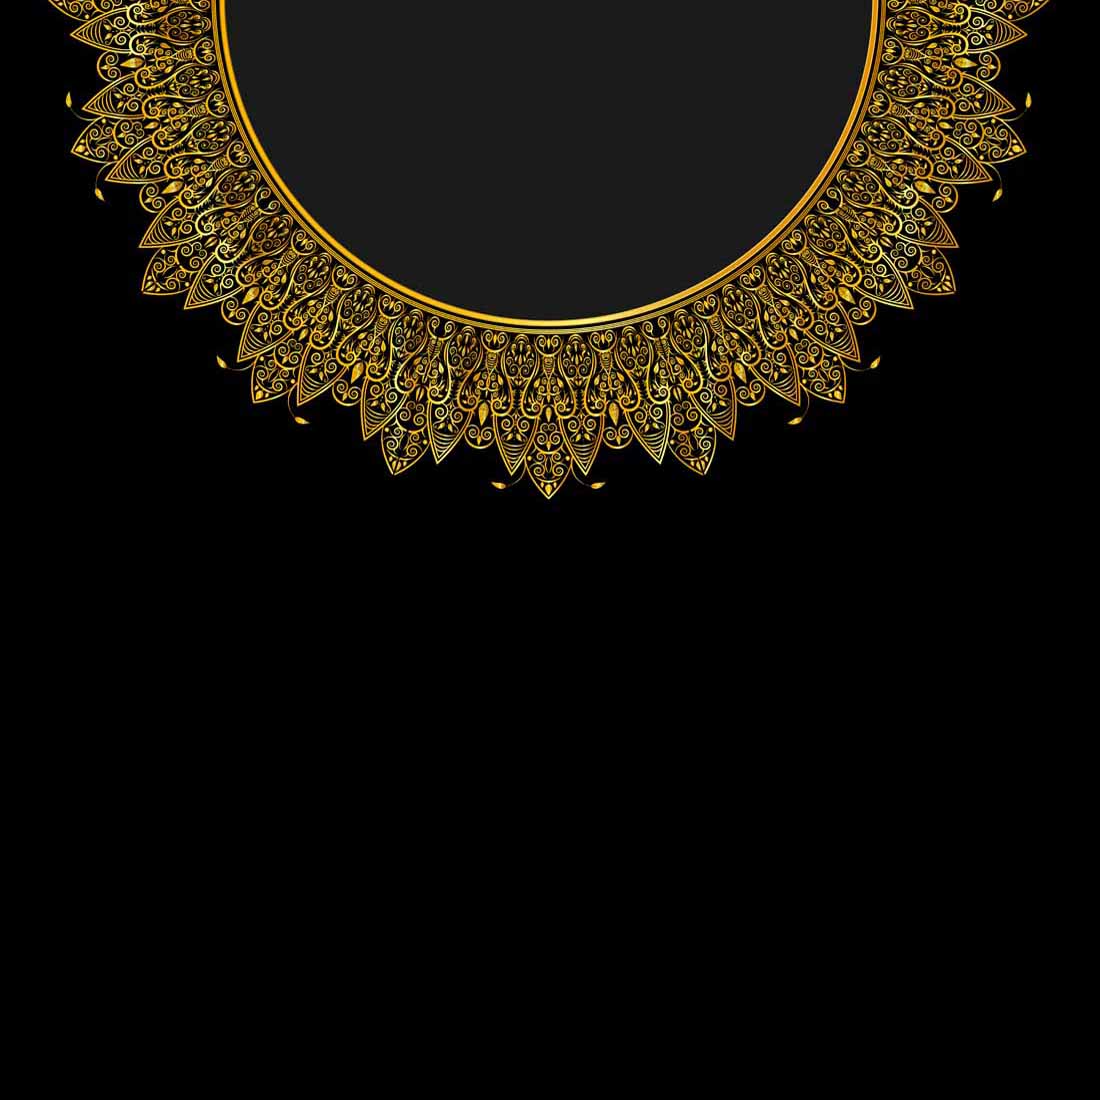 golden woman dress ornament frames design vector around neck sides and chest 738